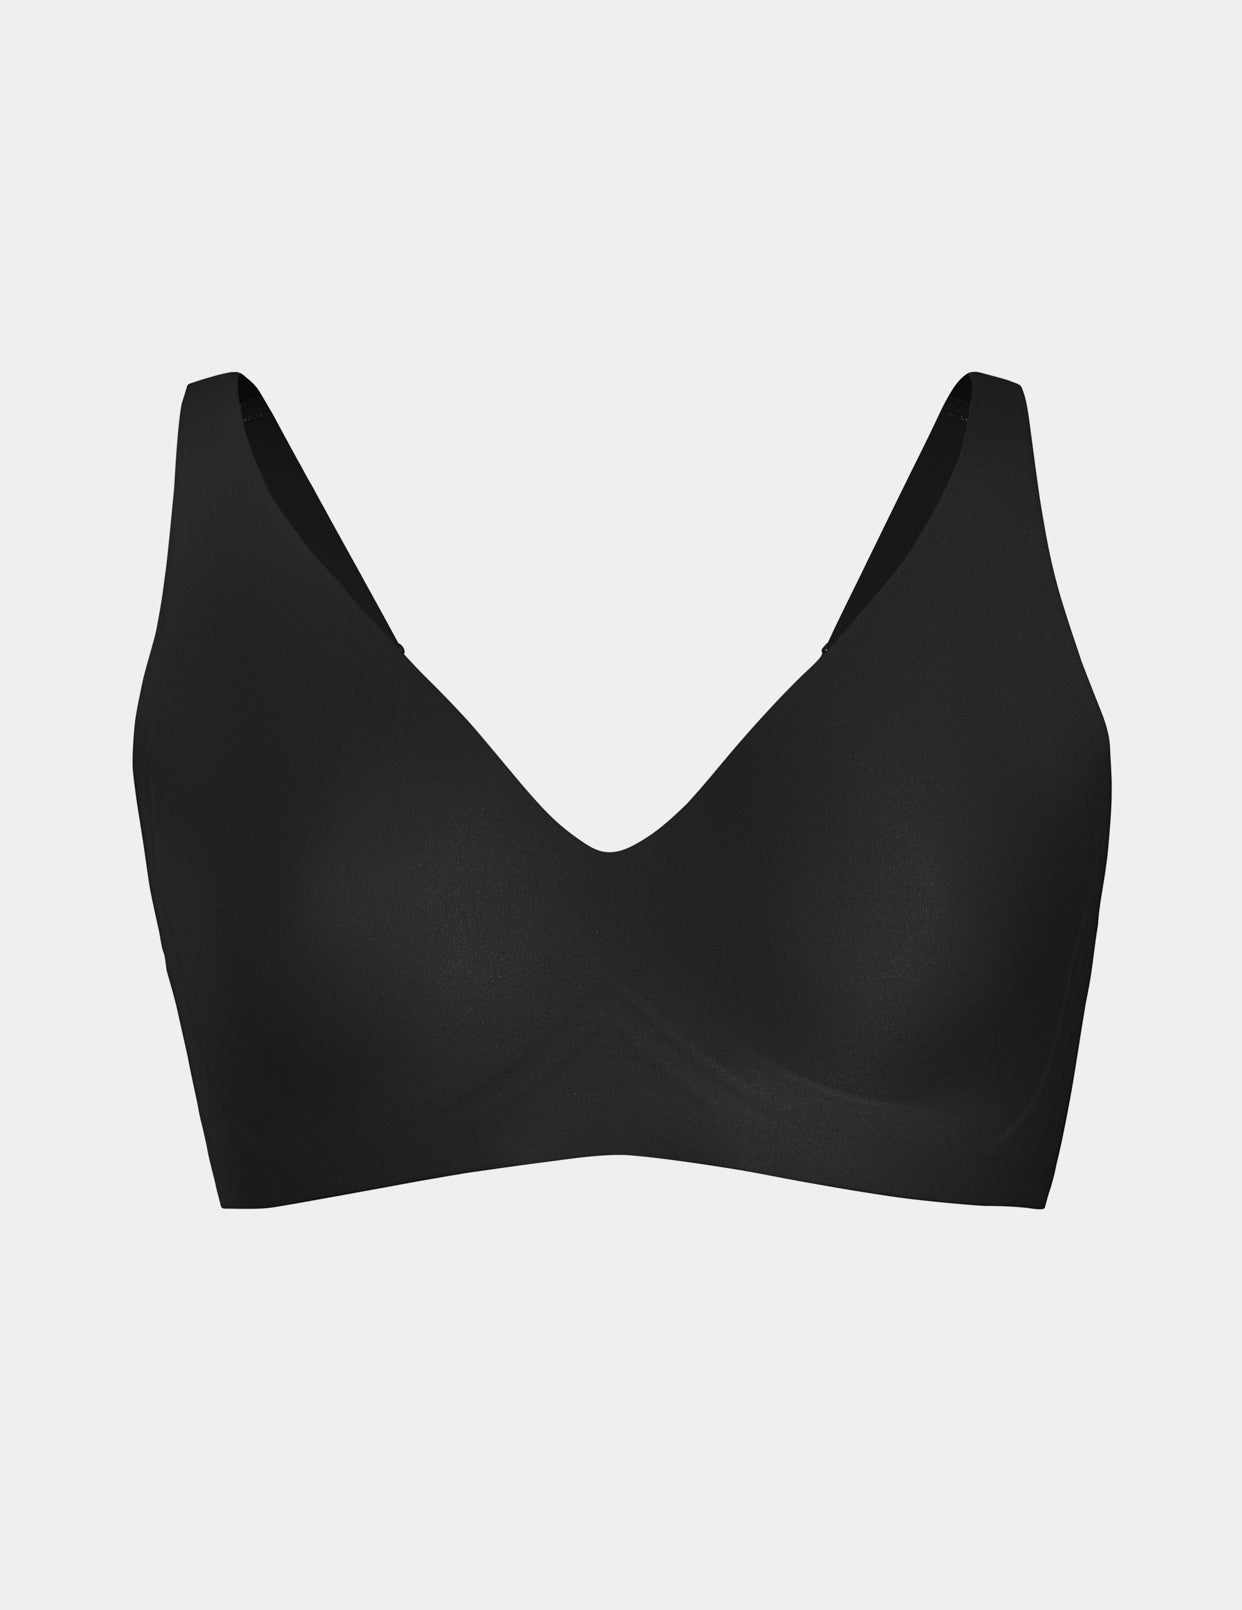 The Adidas Bra Revolution Will Make Your Workout Session Easier — THREAD by  ZALORA Malaysia